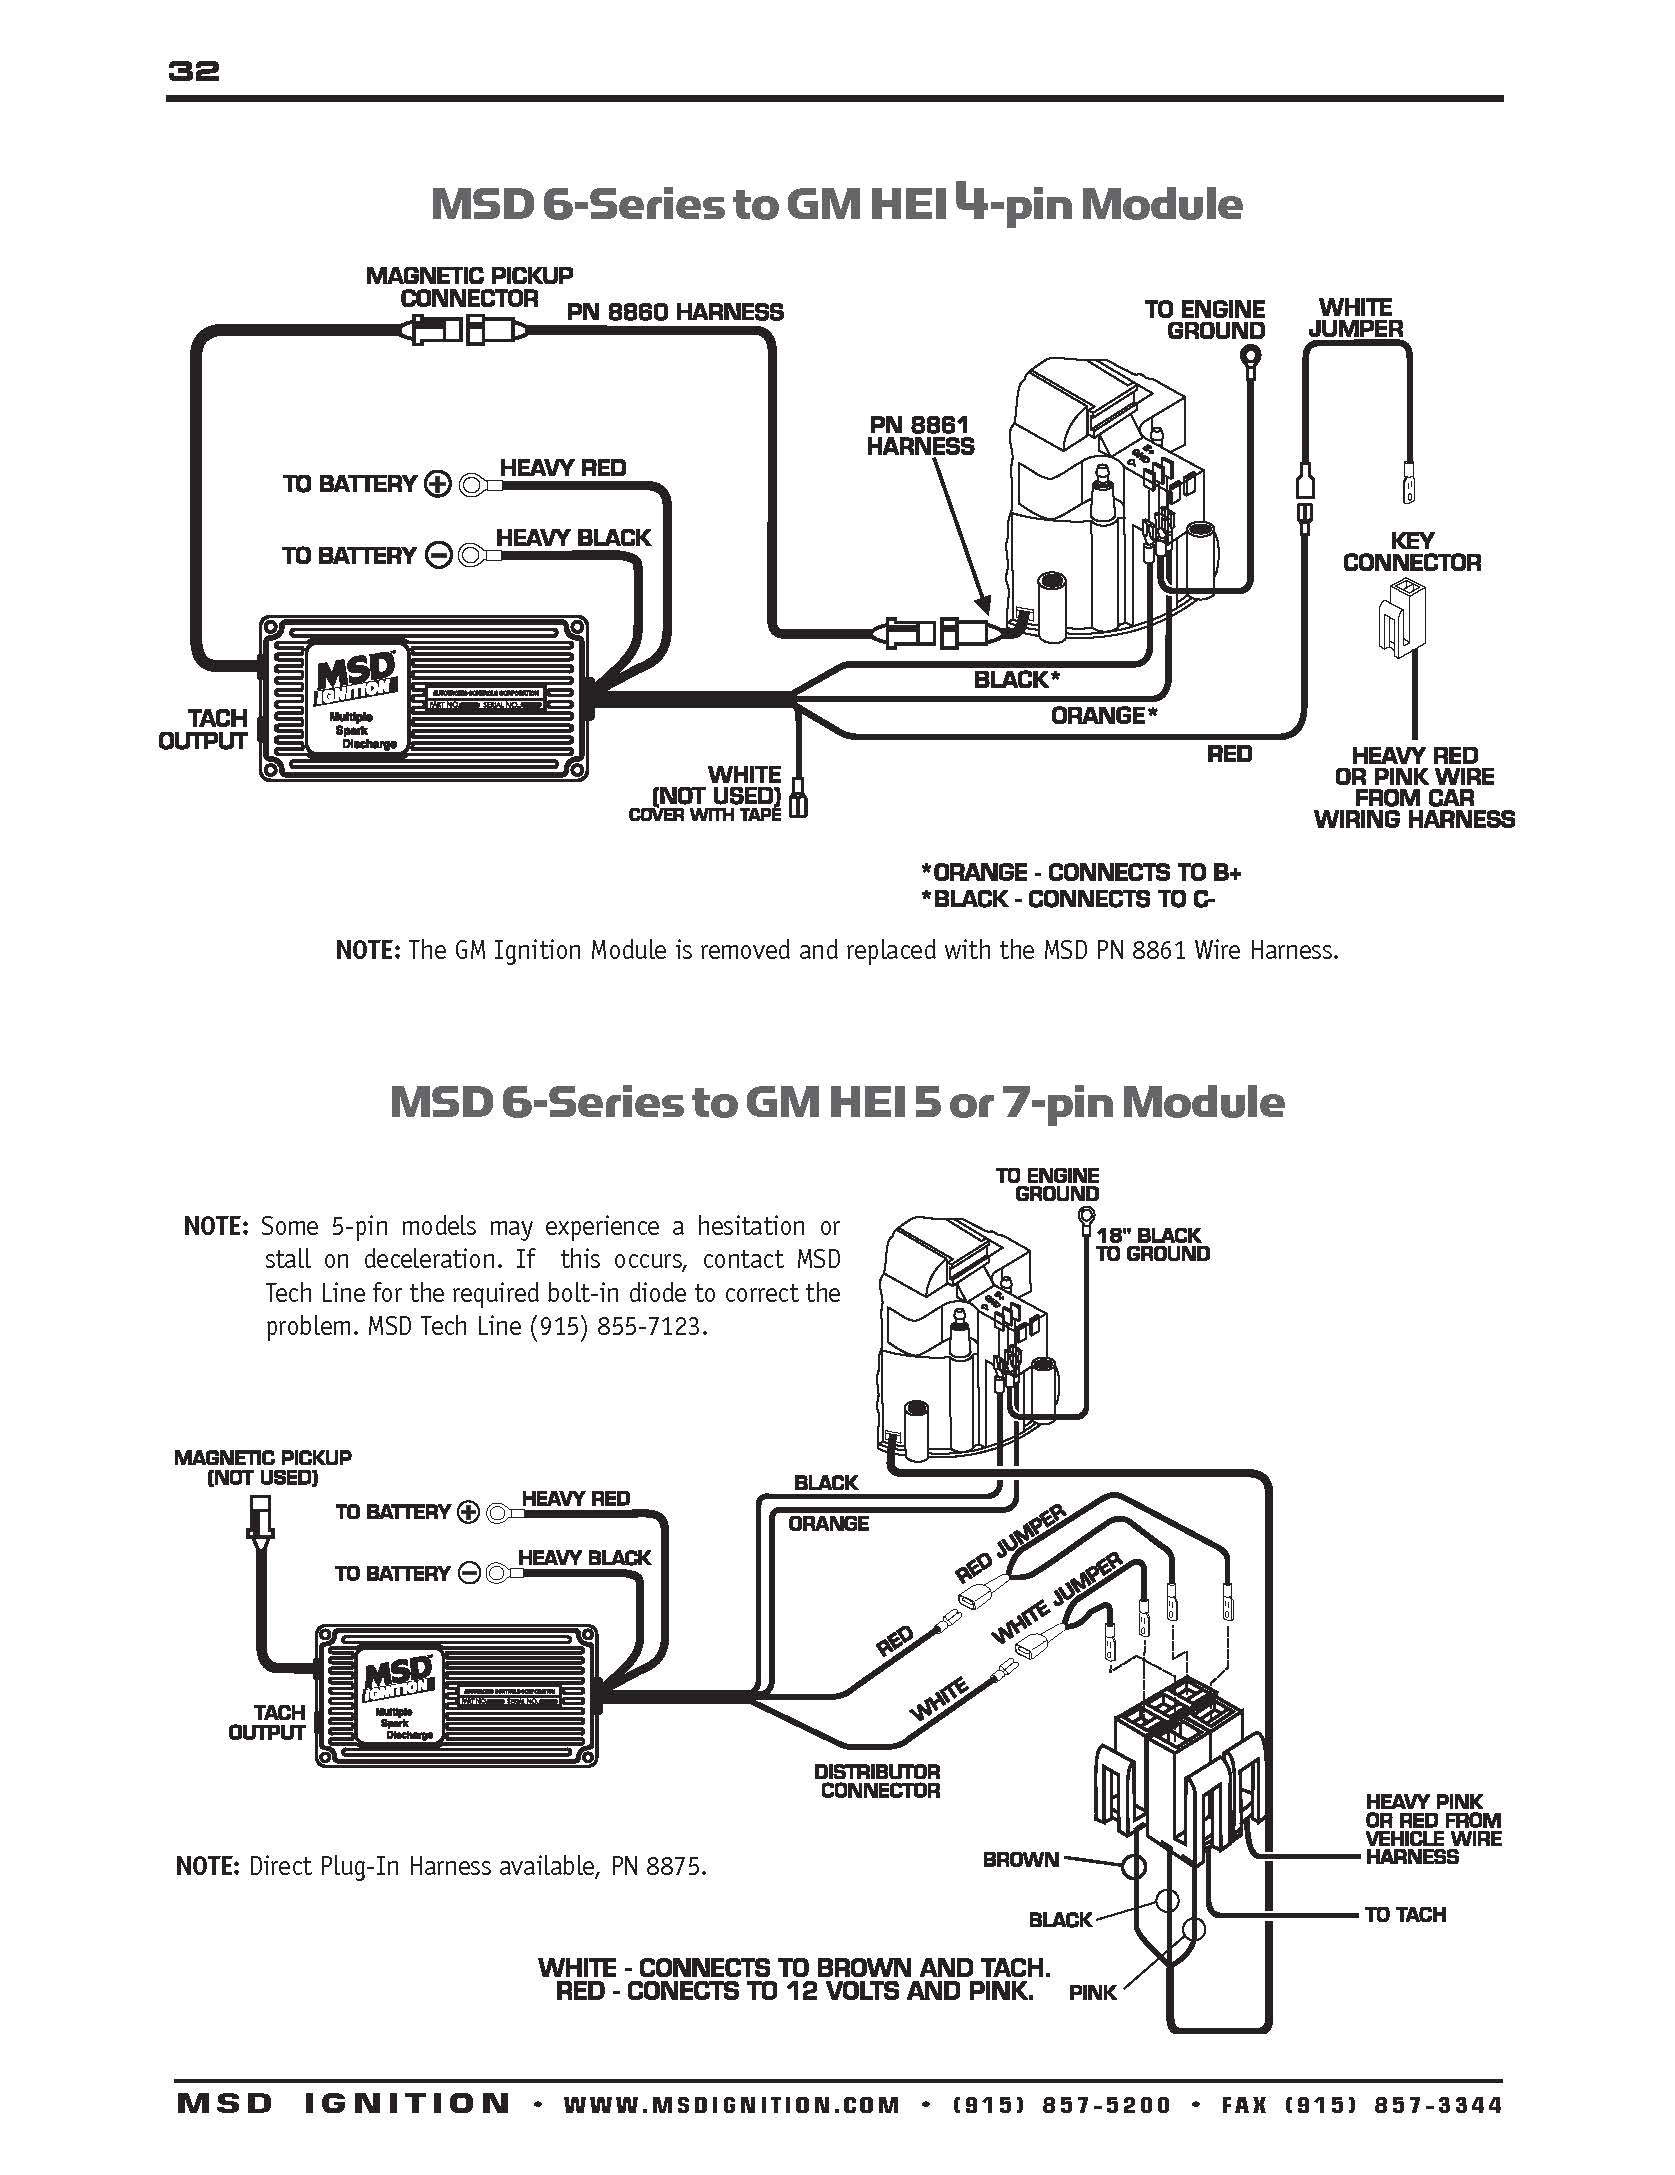 msd ignition wiring diagrams 1966 chevelle diagram automotive wiring diagram for msd ignition msd ignition